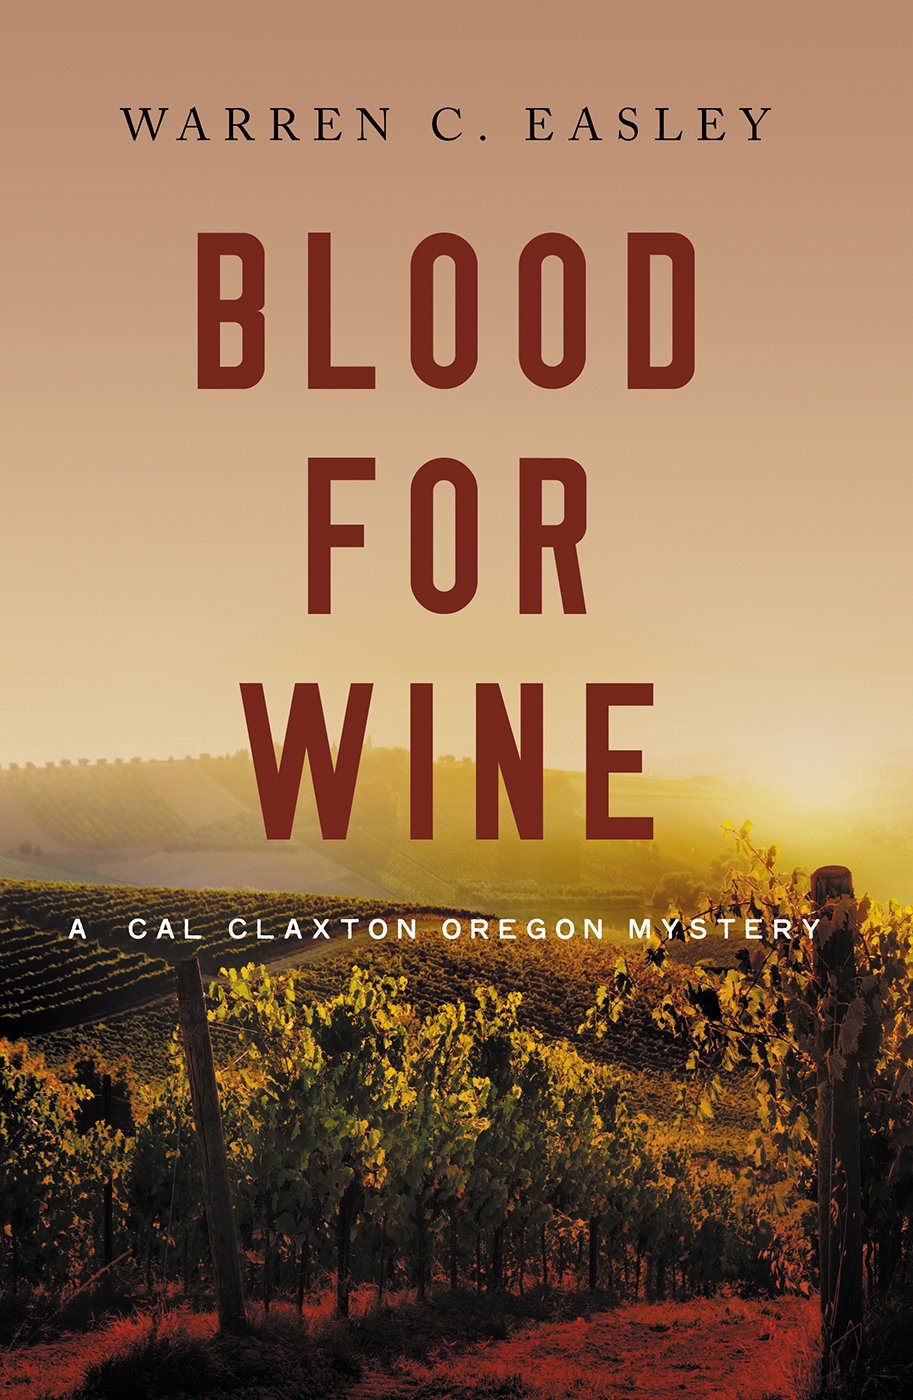 BLOOD FOR WINE (Nero Wolfe Award finalist for 2018)